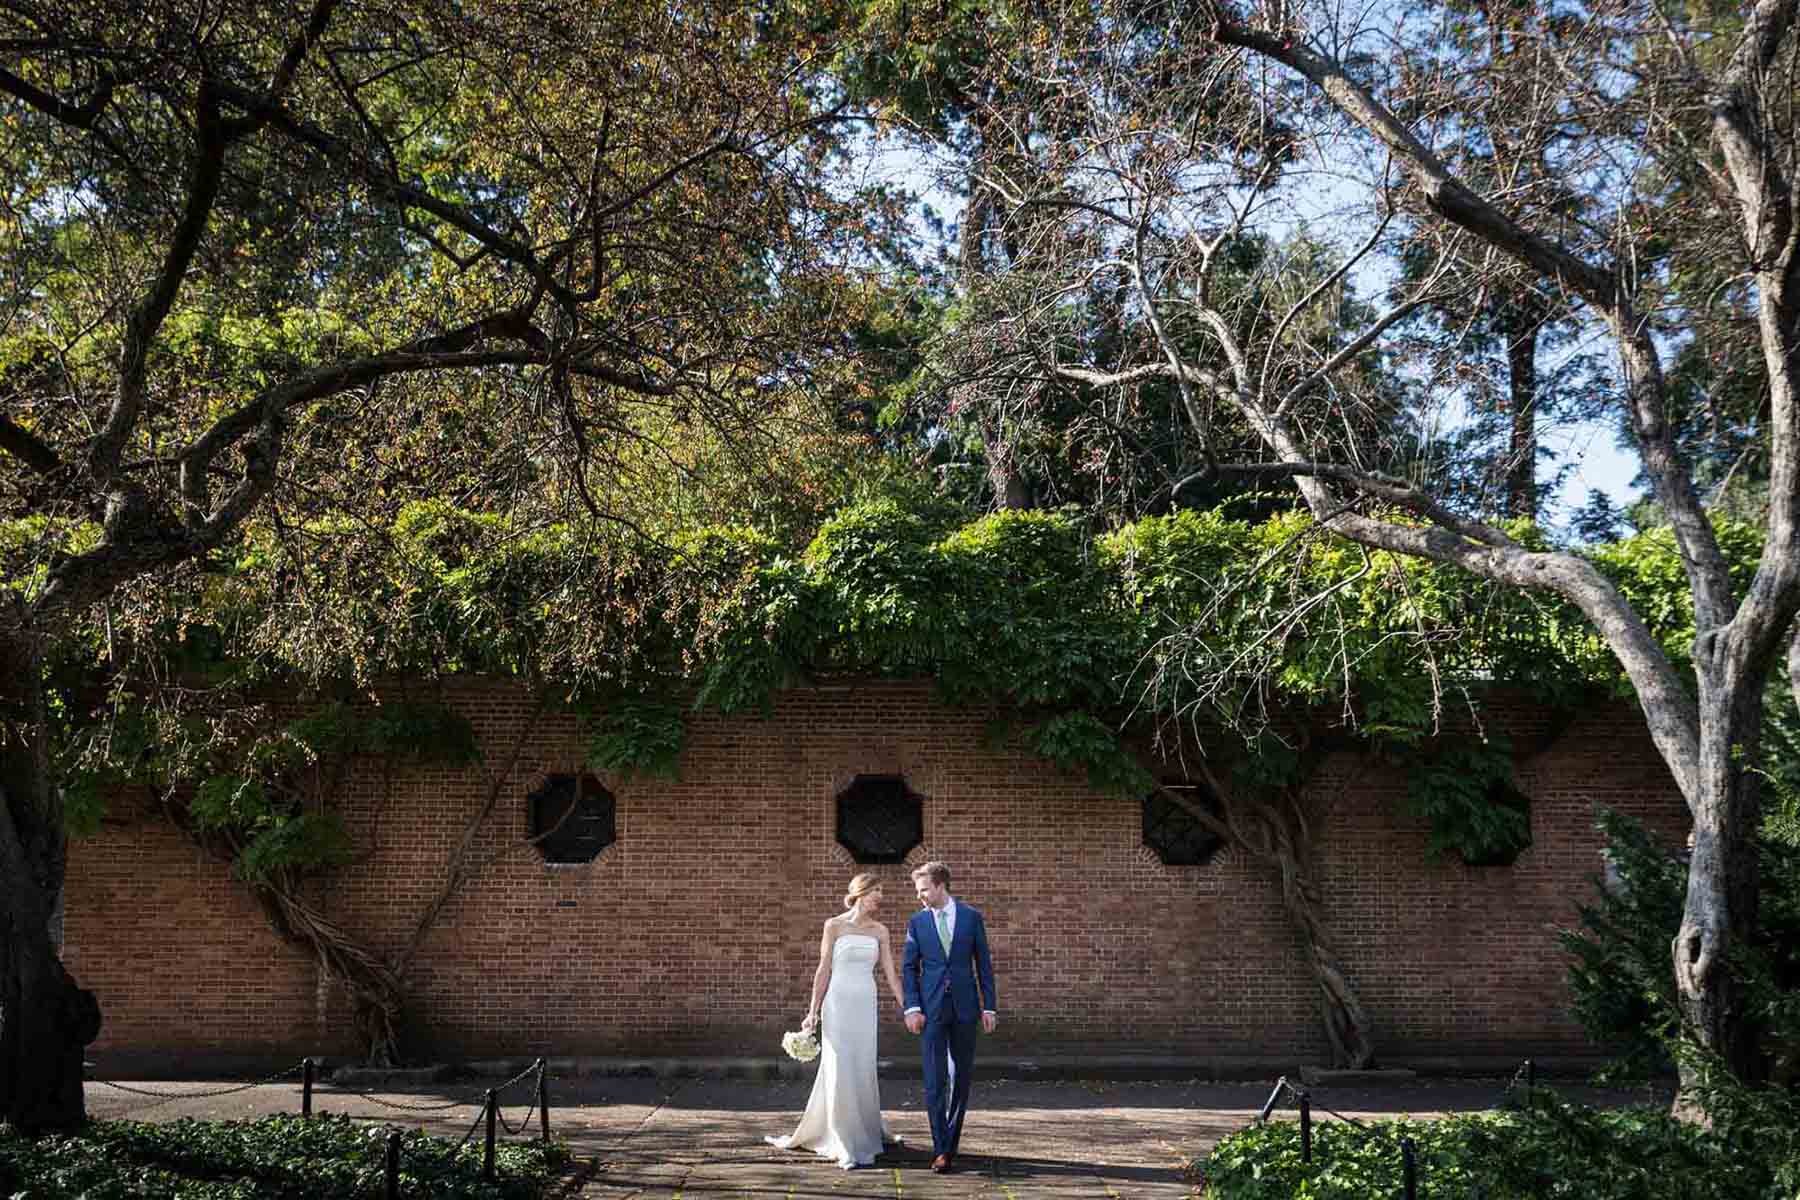 Conservatory Garden wedding photos of bride and groom walking down pathway in front of brick wall